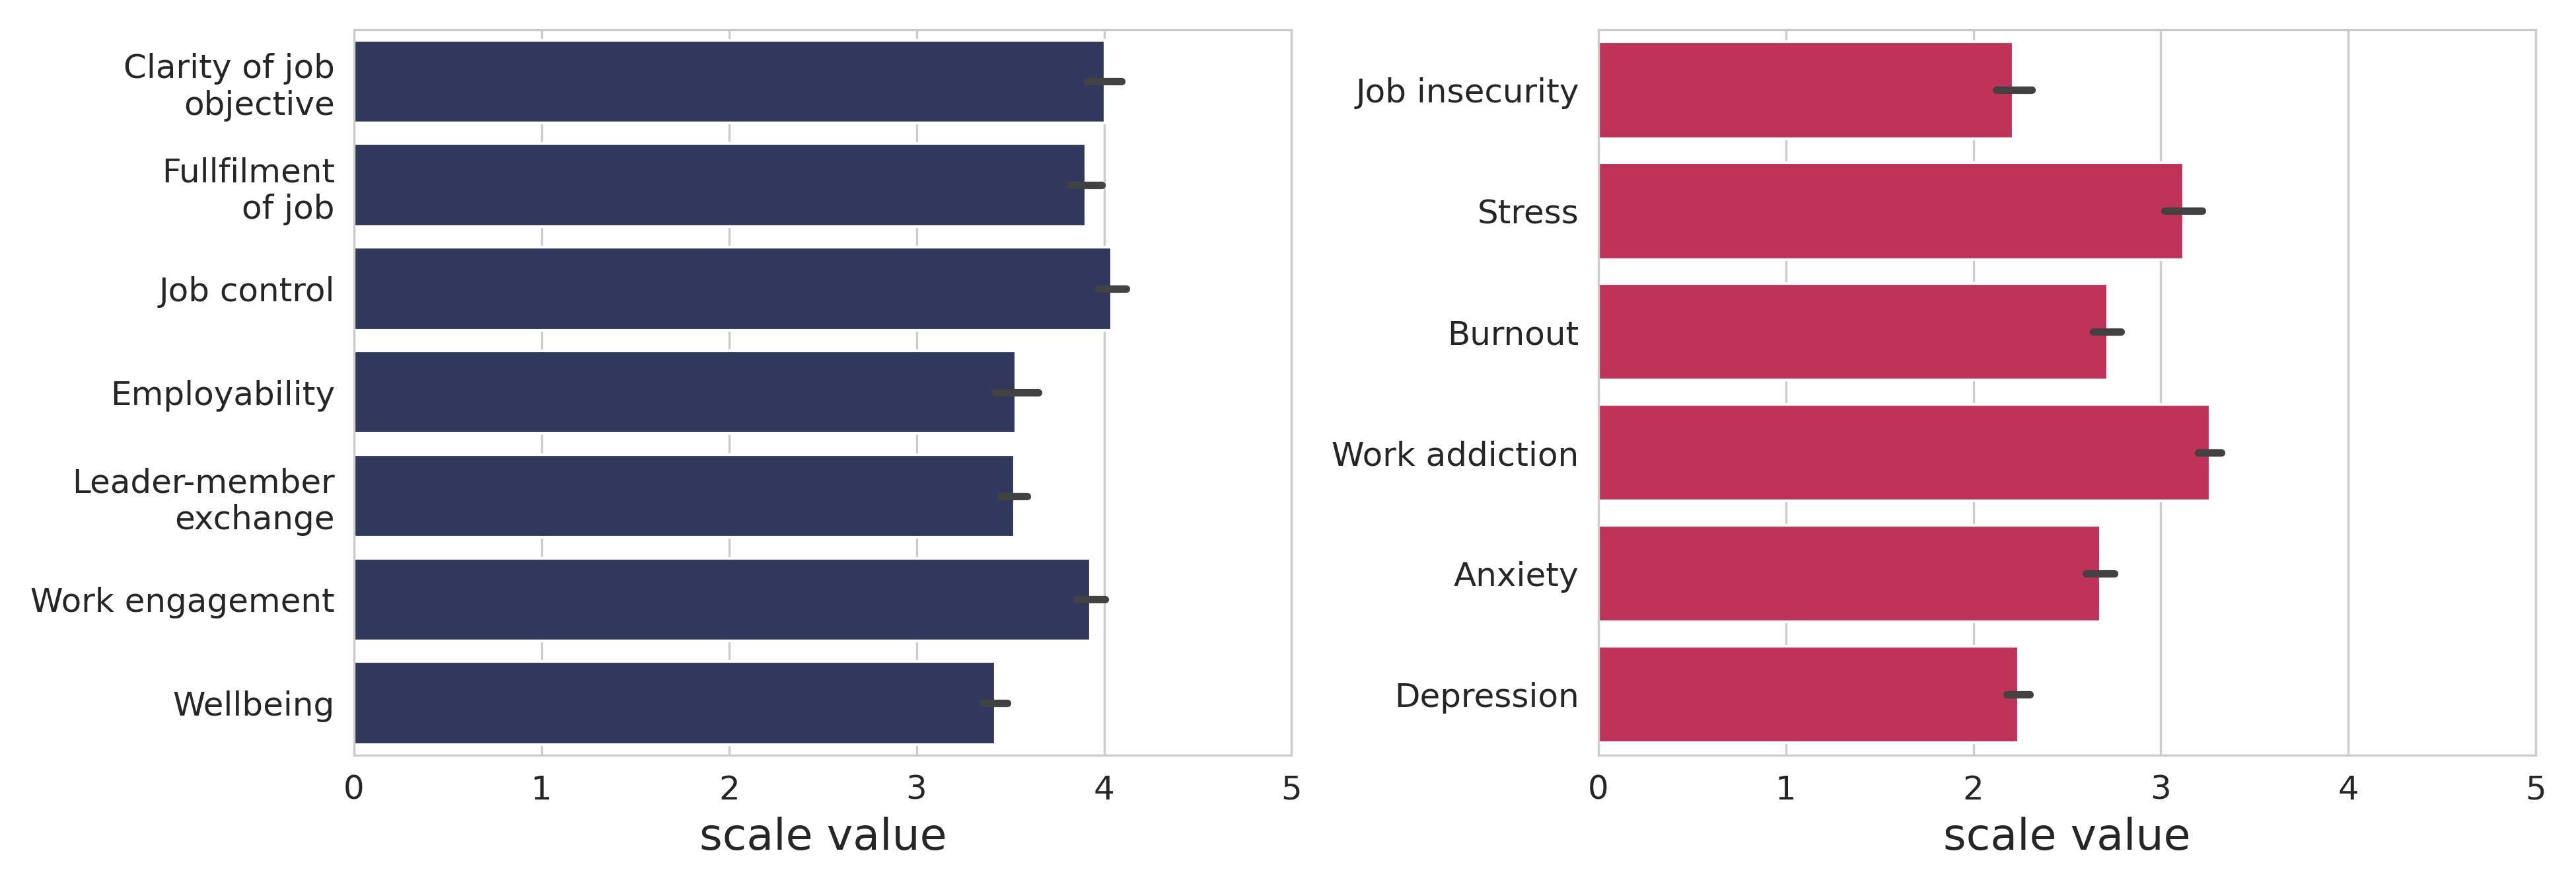 Image showing the average scale values of a number of wellbeing measures such as fulfillment of job and leader-member-exchange, as well as mental health impairment measures such as PHQ9 (depression) and GAD7 (anxiety) for our pilot study population in Montenegro